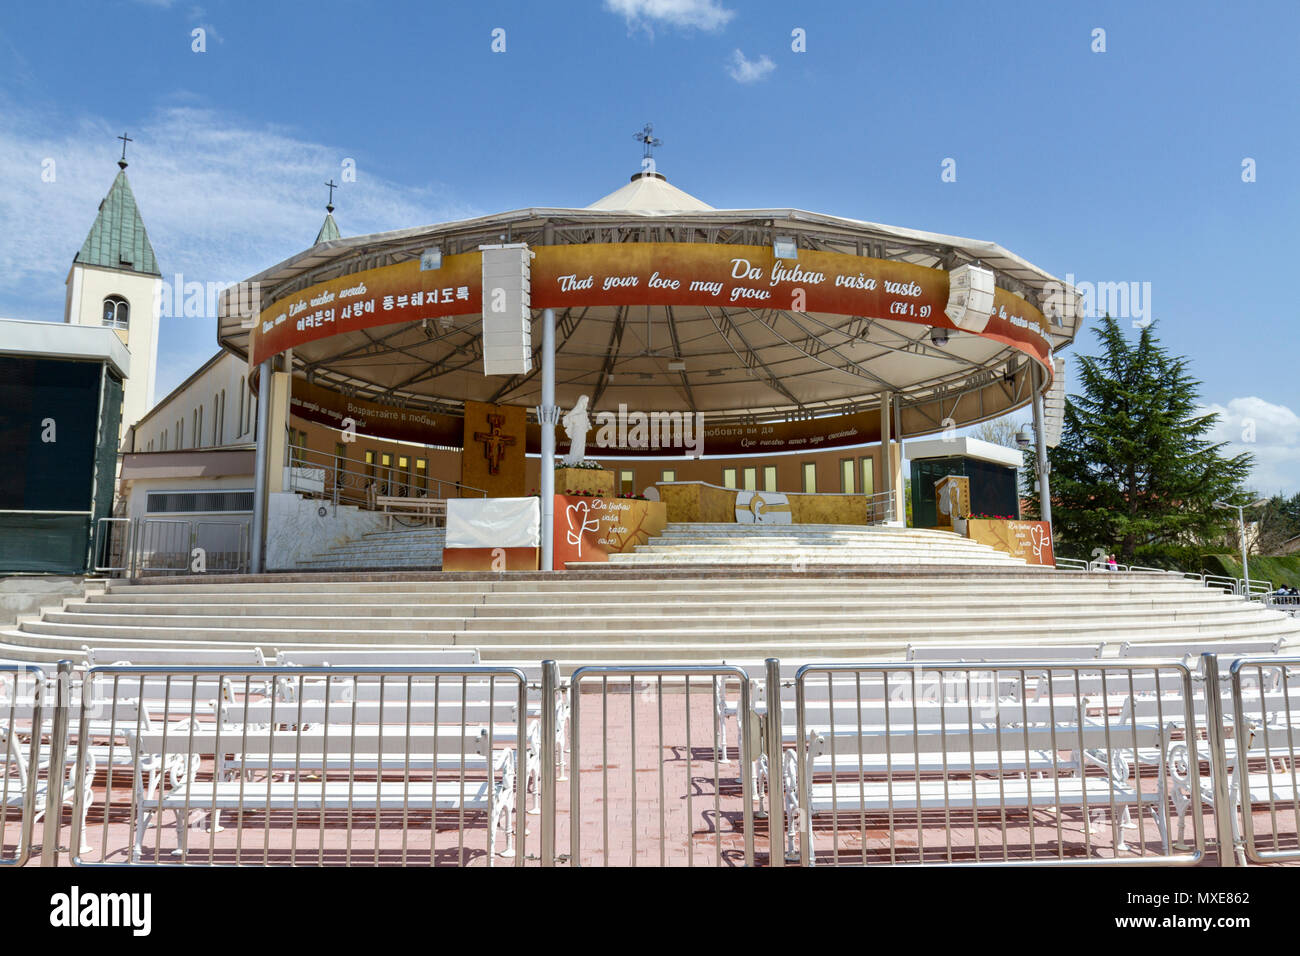 The outdoor altar to the Saint James church in Međugorje (or Medjugorje), Federation of Bosnia and Herzegovina. Stock Photo